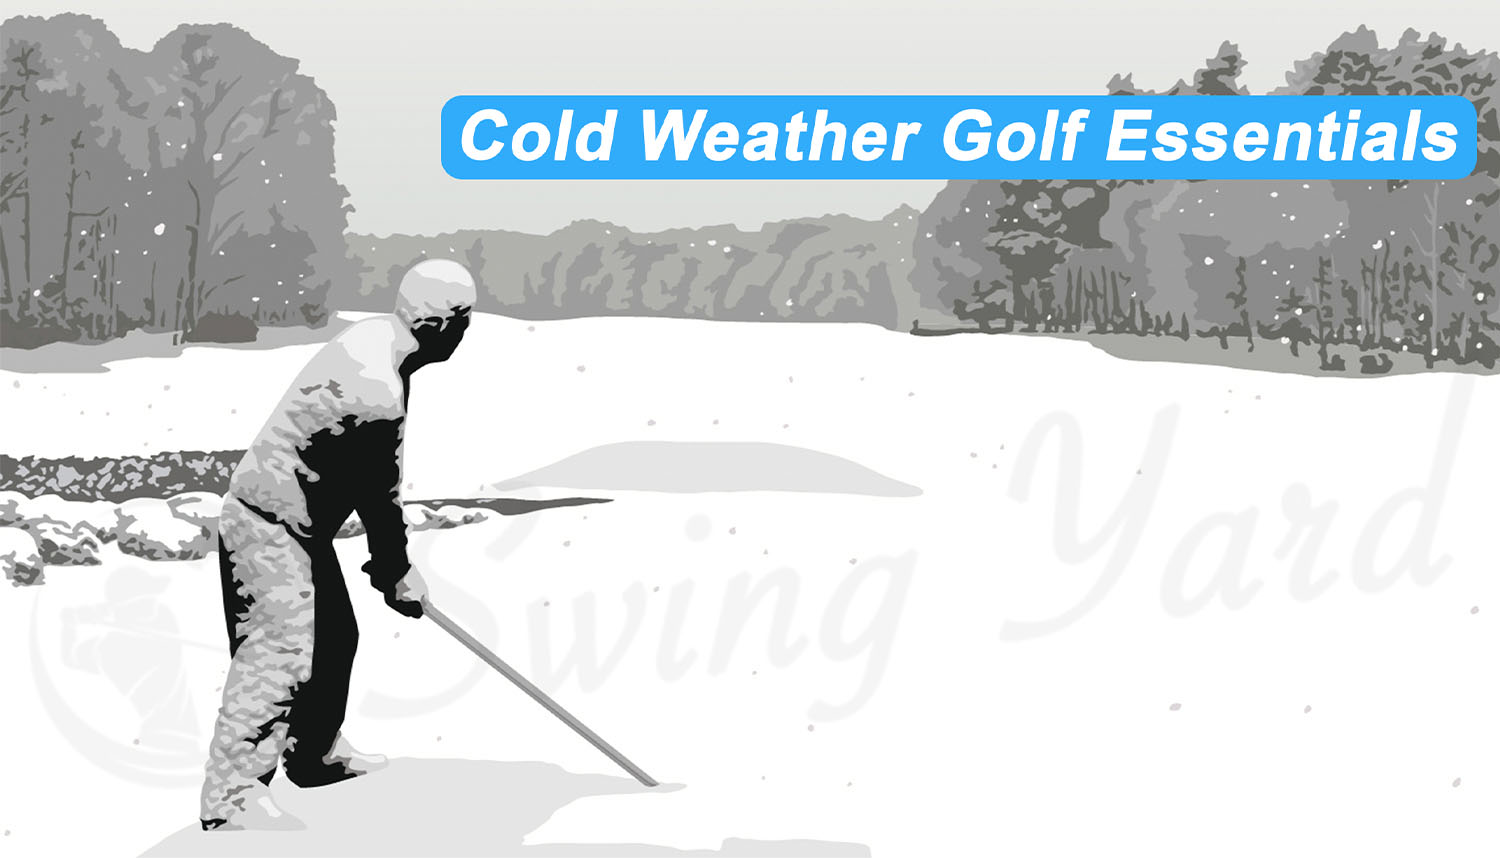 A guy covered in snow playing golf in the winter